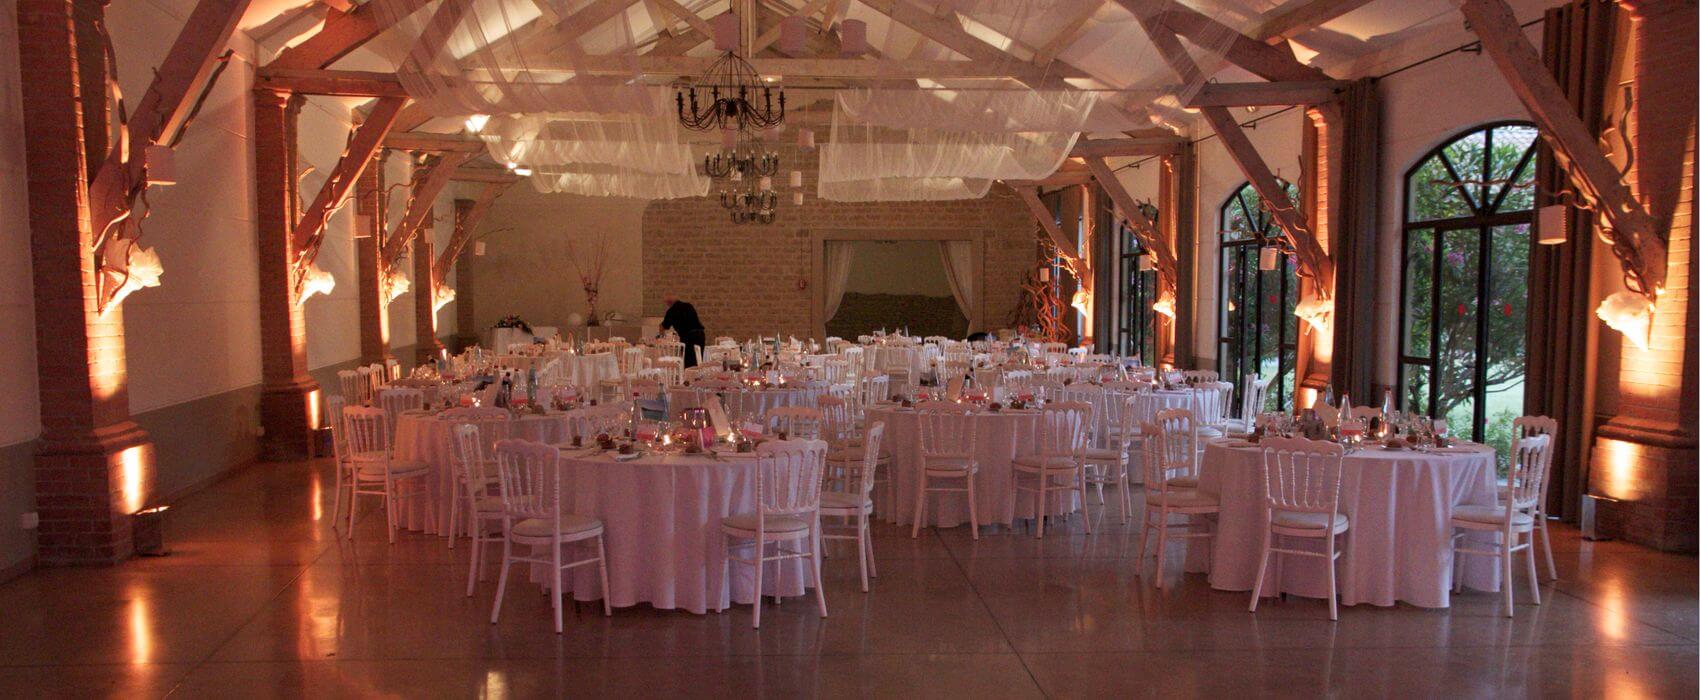 Sound system and entertainment for weddings and birthdays in Provence